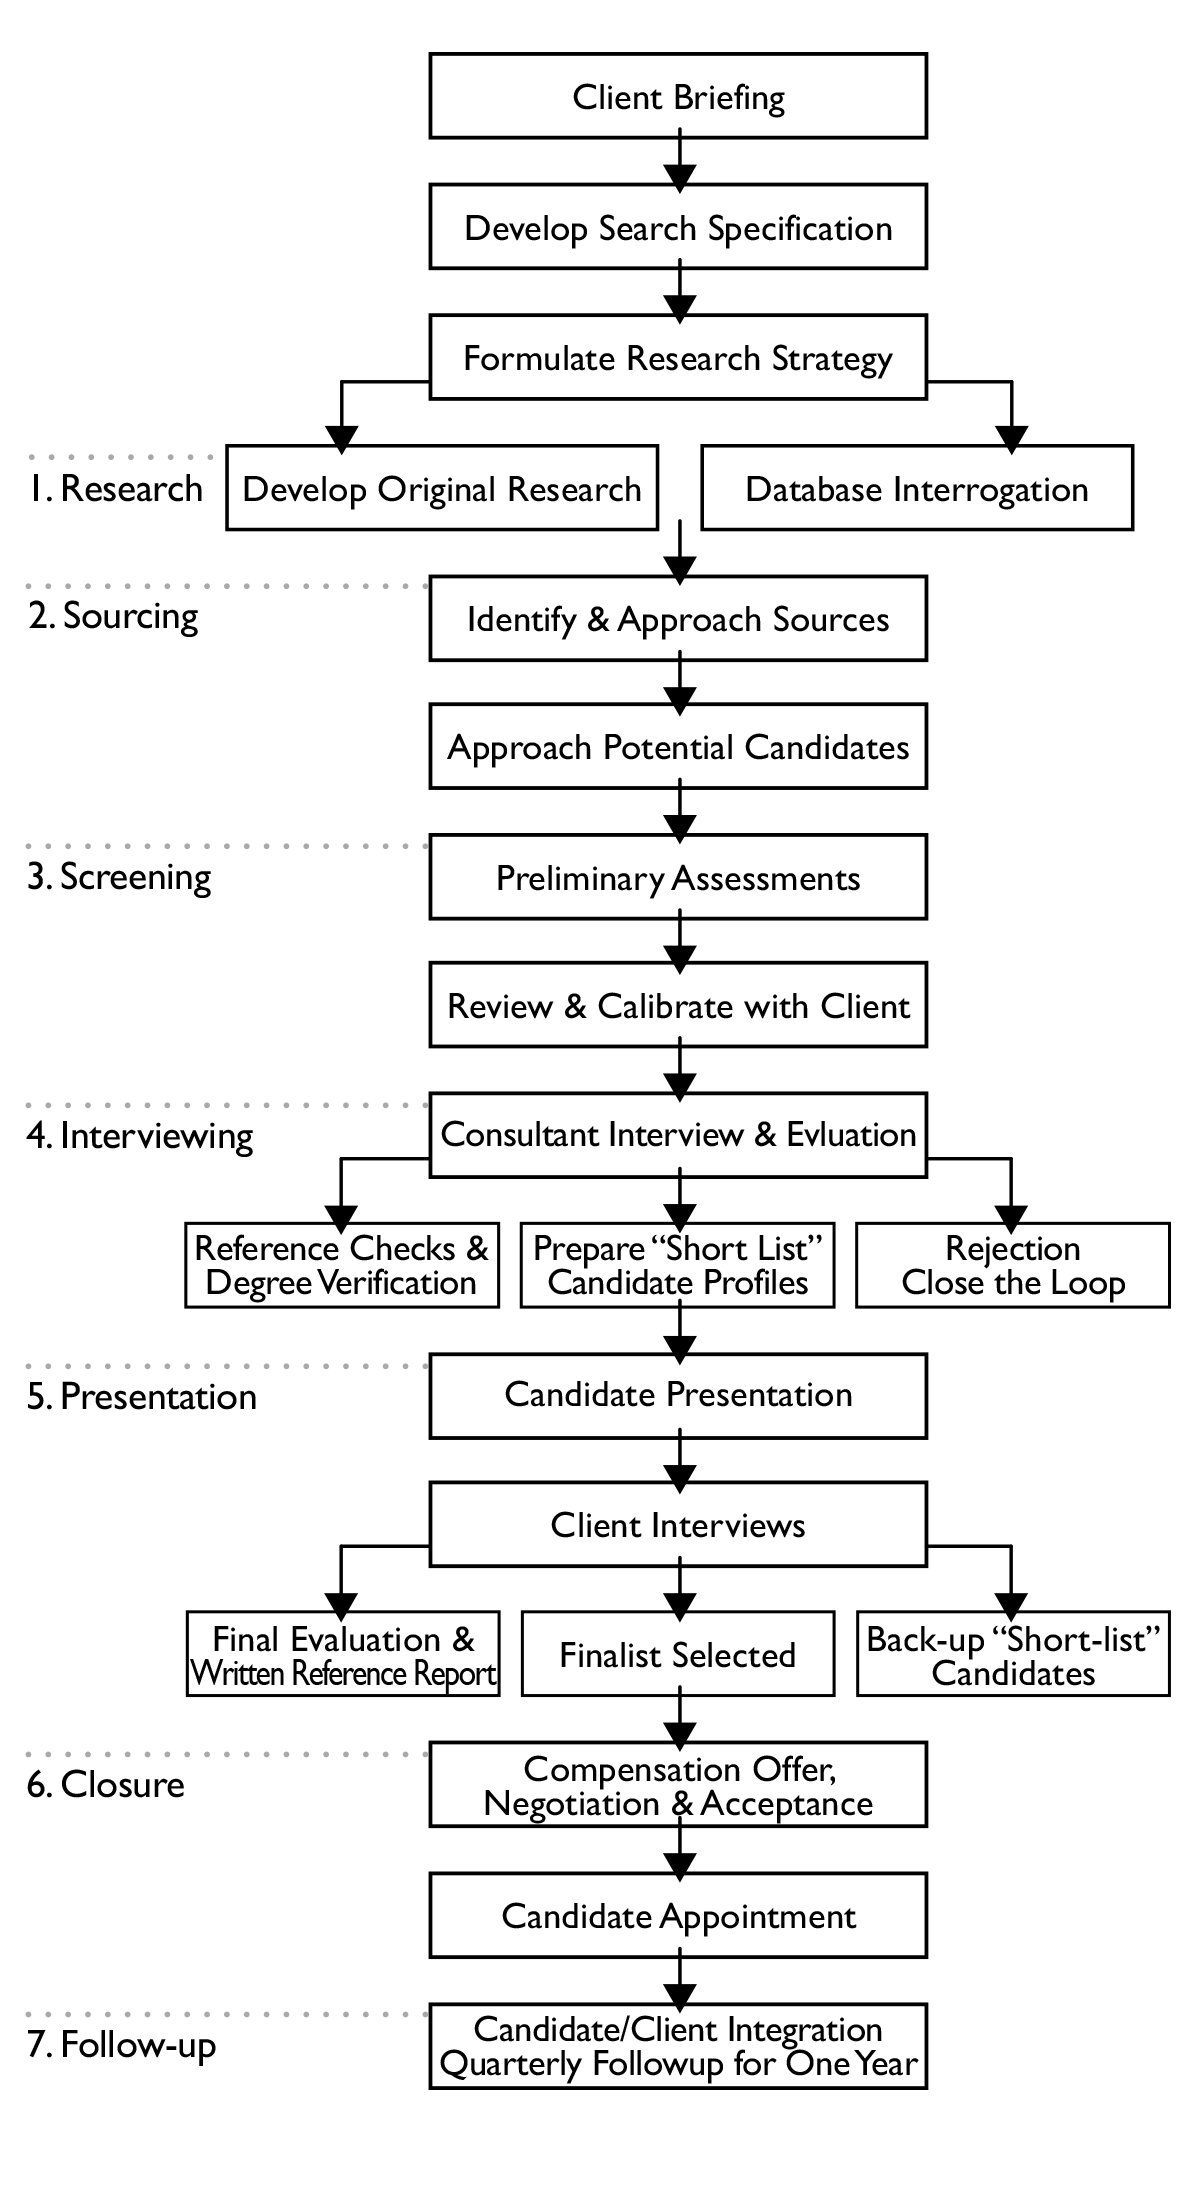 Search Process Overview map